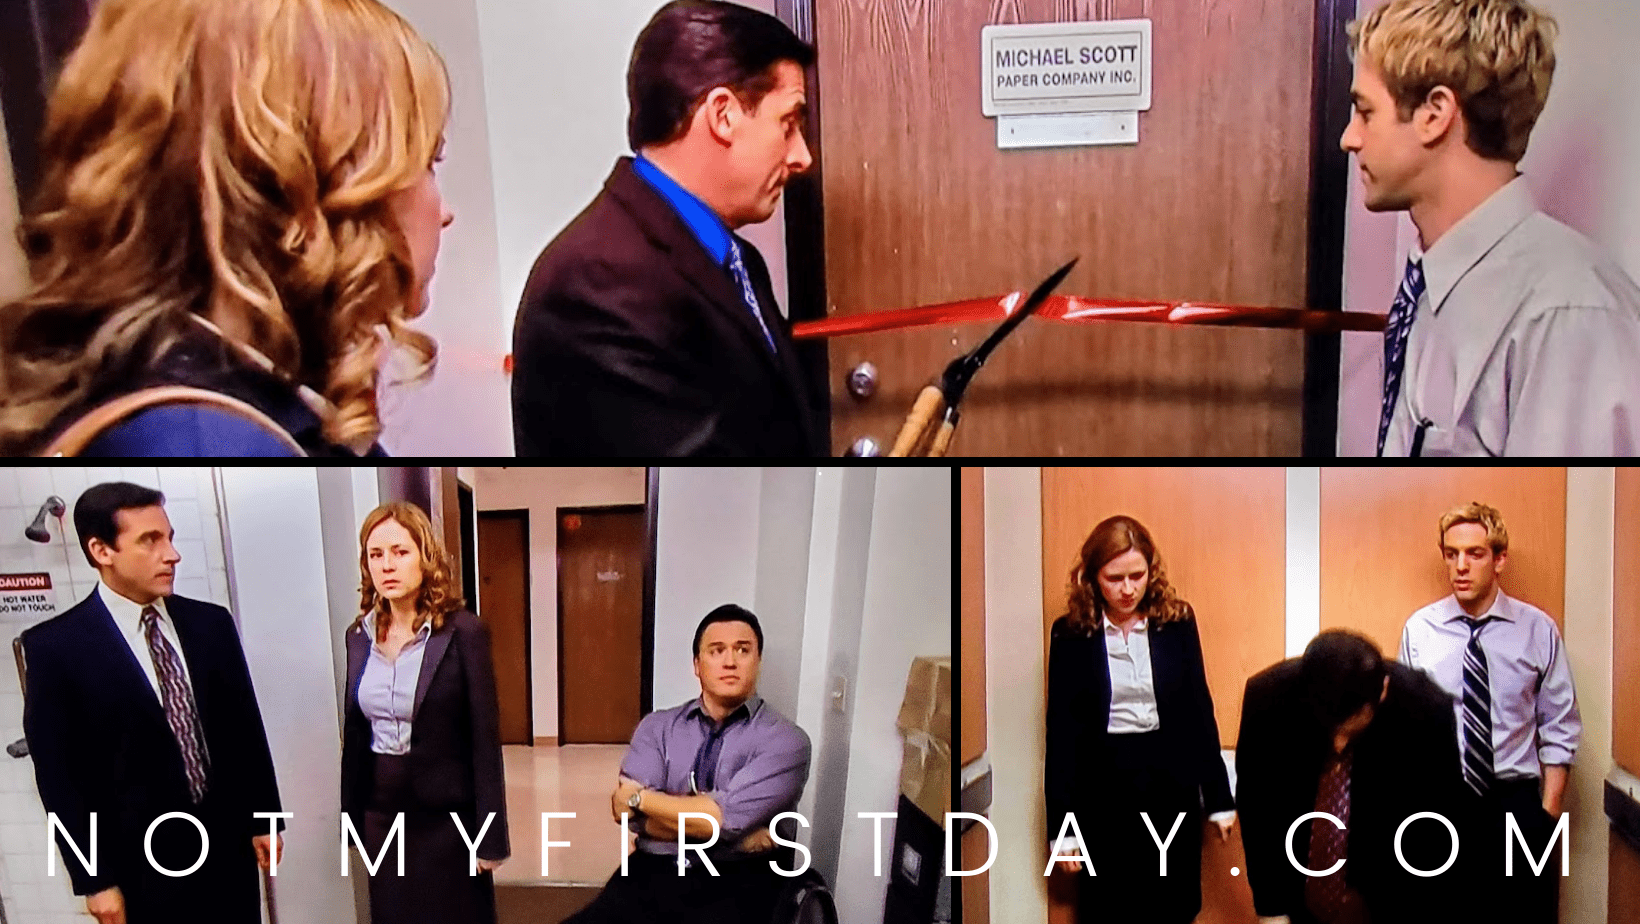 The Michael Scott Paper Company on The Office